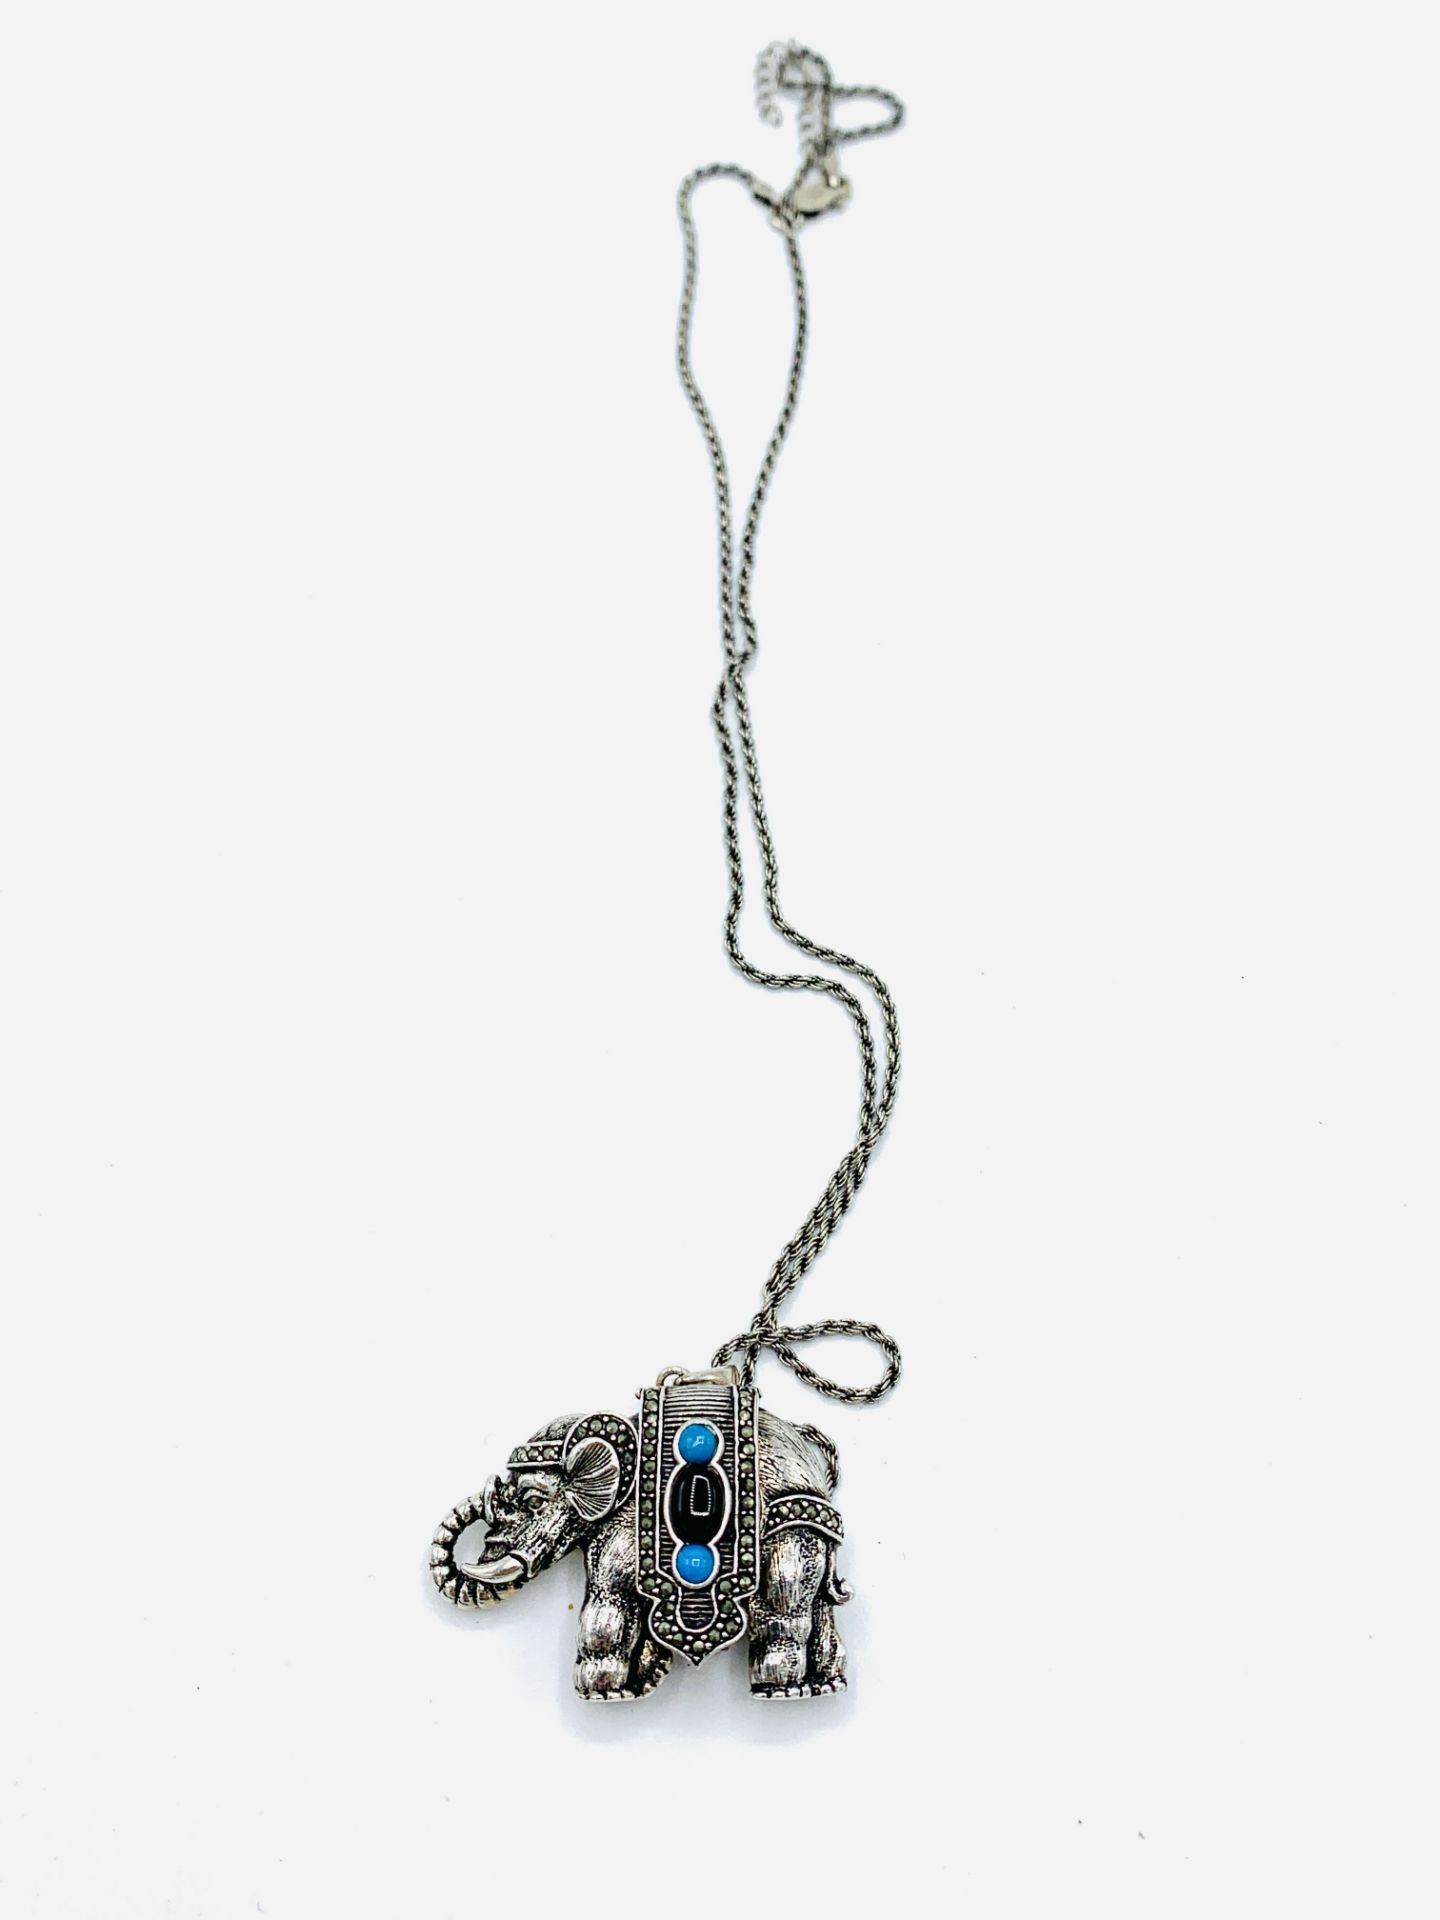 Sterling silver elephant watch pendant on a 925 silver chain - Image 3 of 3